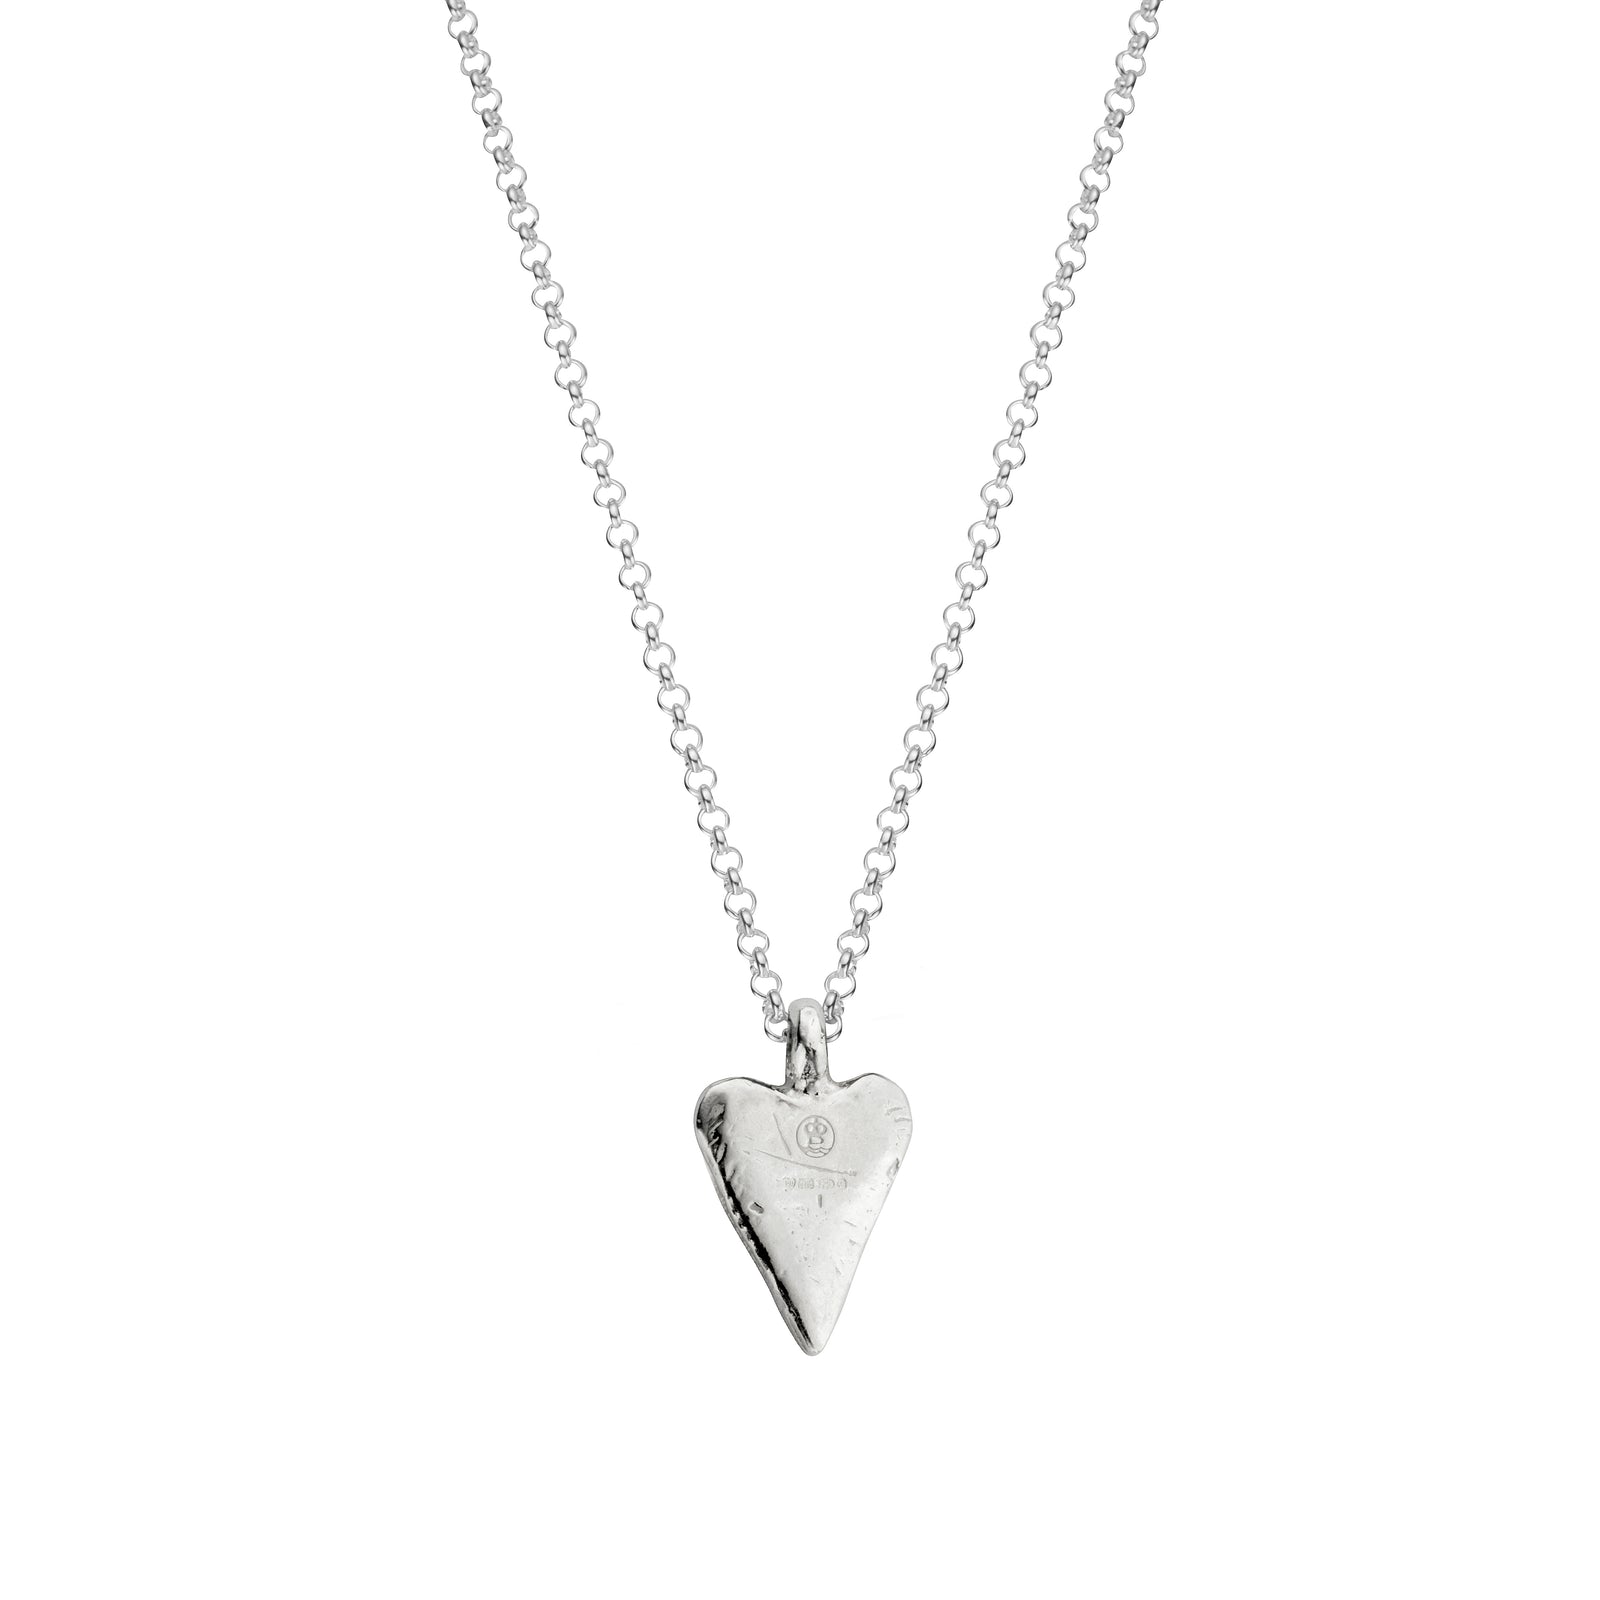 Silver Medium Heart Necklace with Paw Print